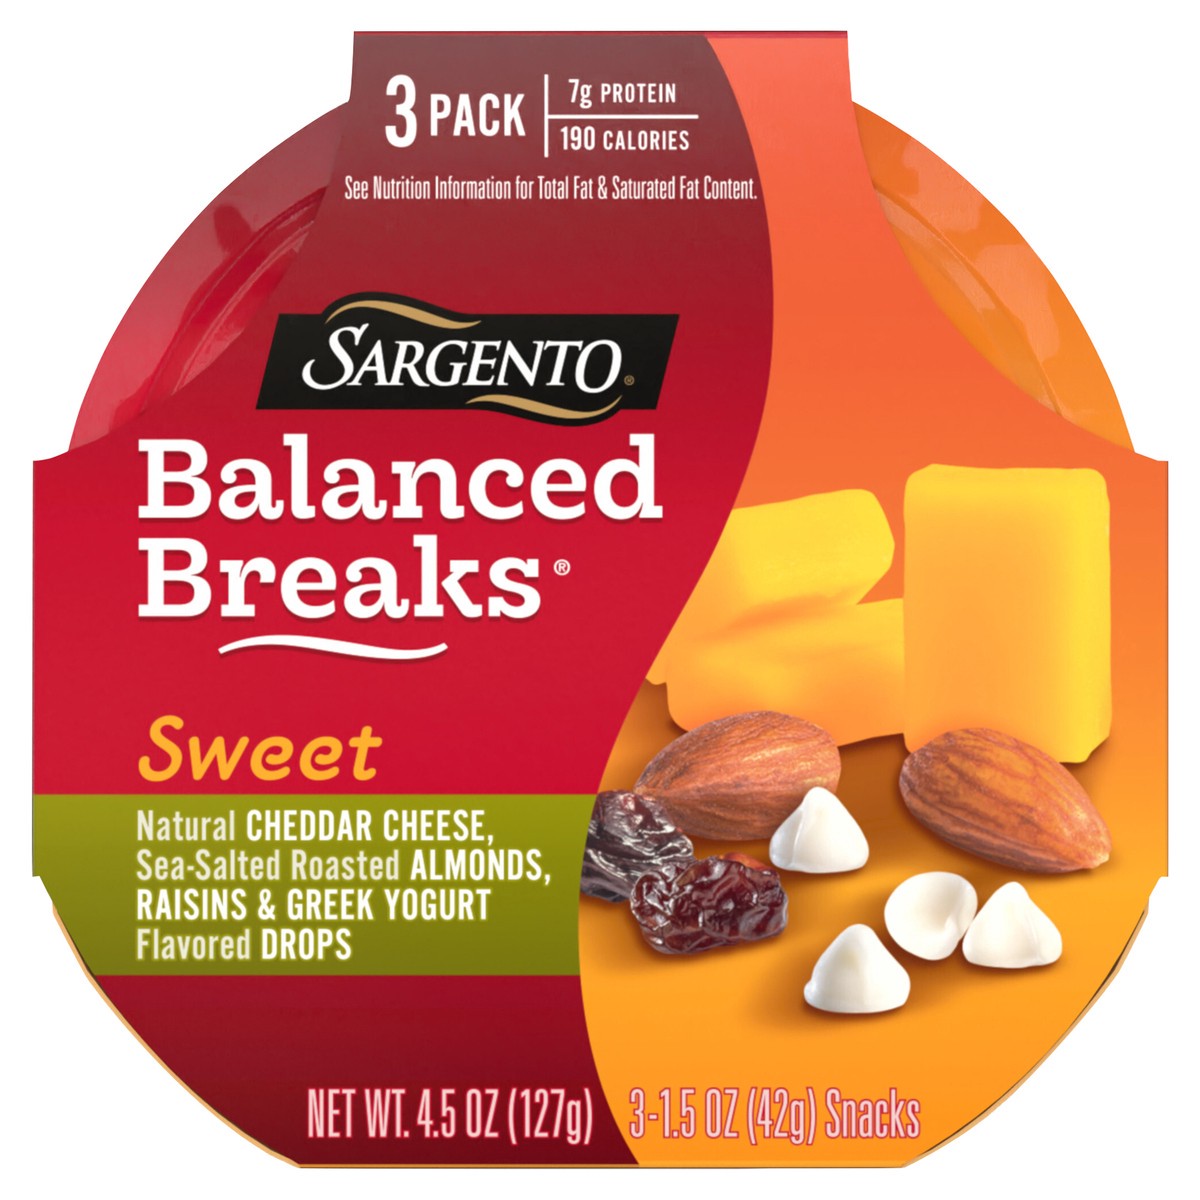 slide 1 of 30, Sargento Sweet Balanced Breaks with Natural Cheddar Cheese, Sea-Salted Roasted Almonds, Raisins and Greek Yogurt Flavored Drops, 1.5 oz., 3-Pack, 3 ct